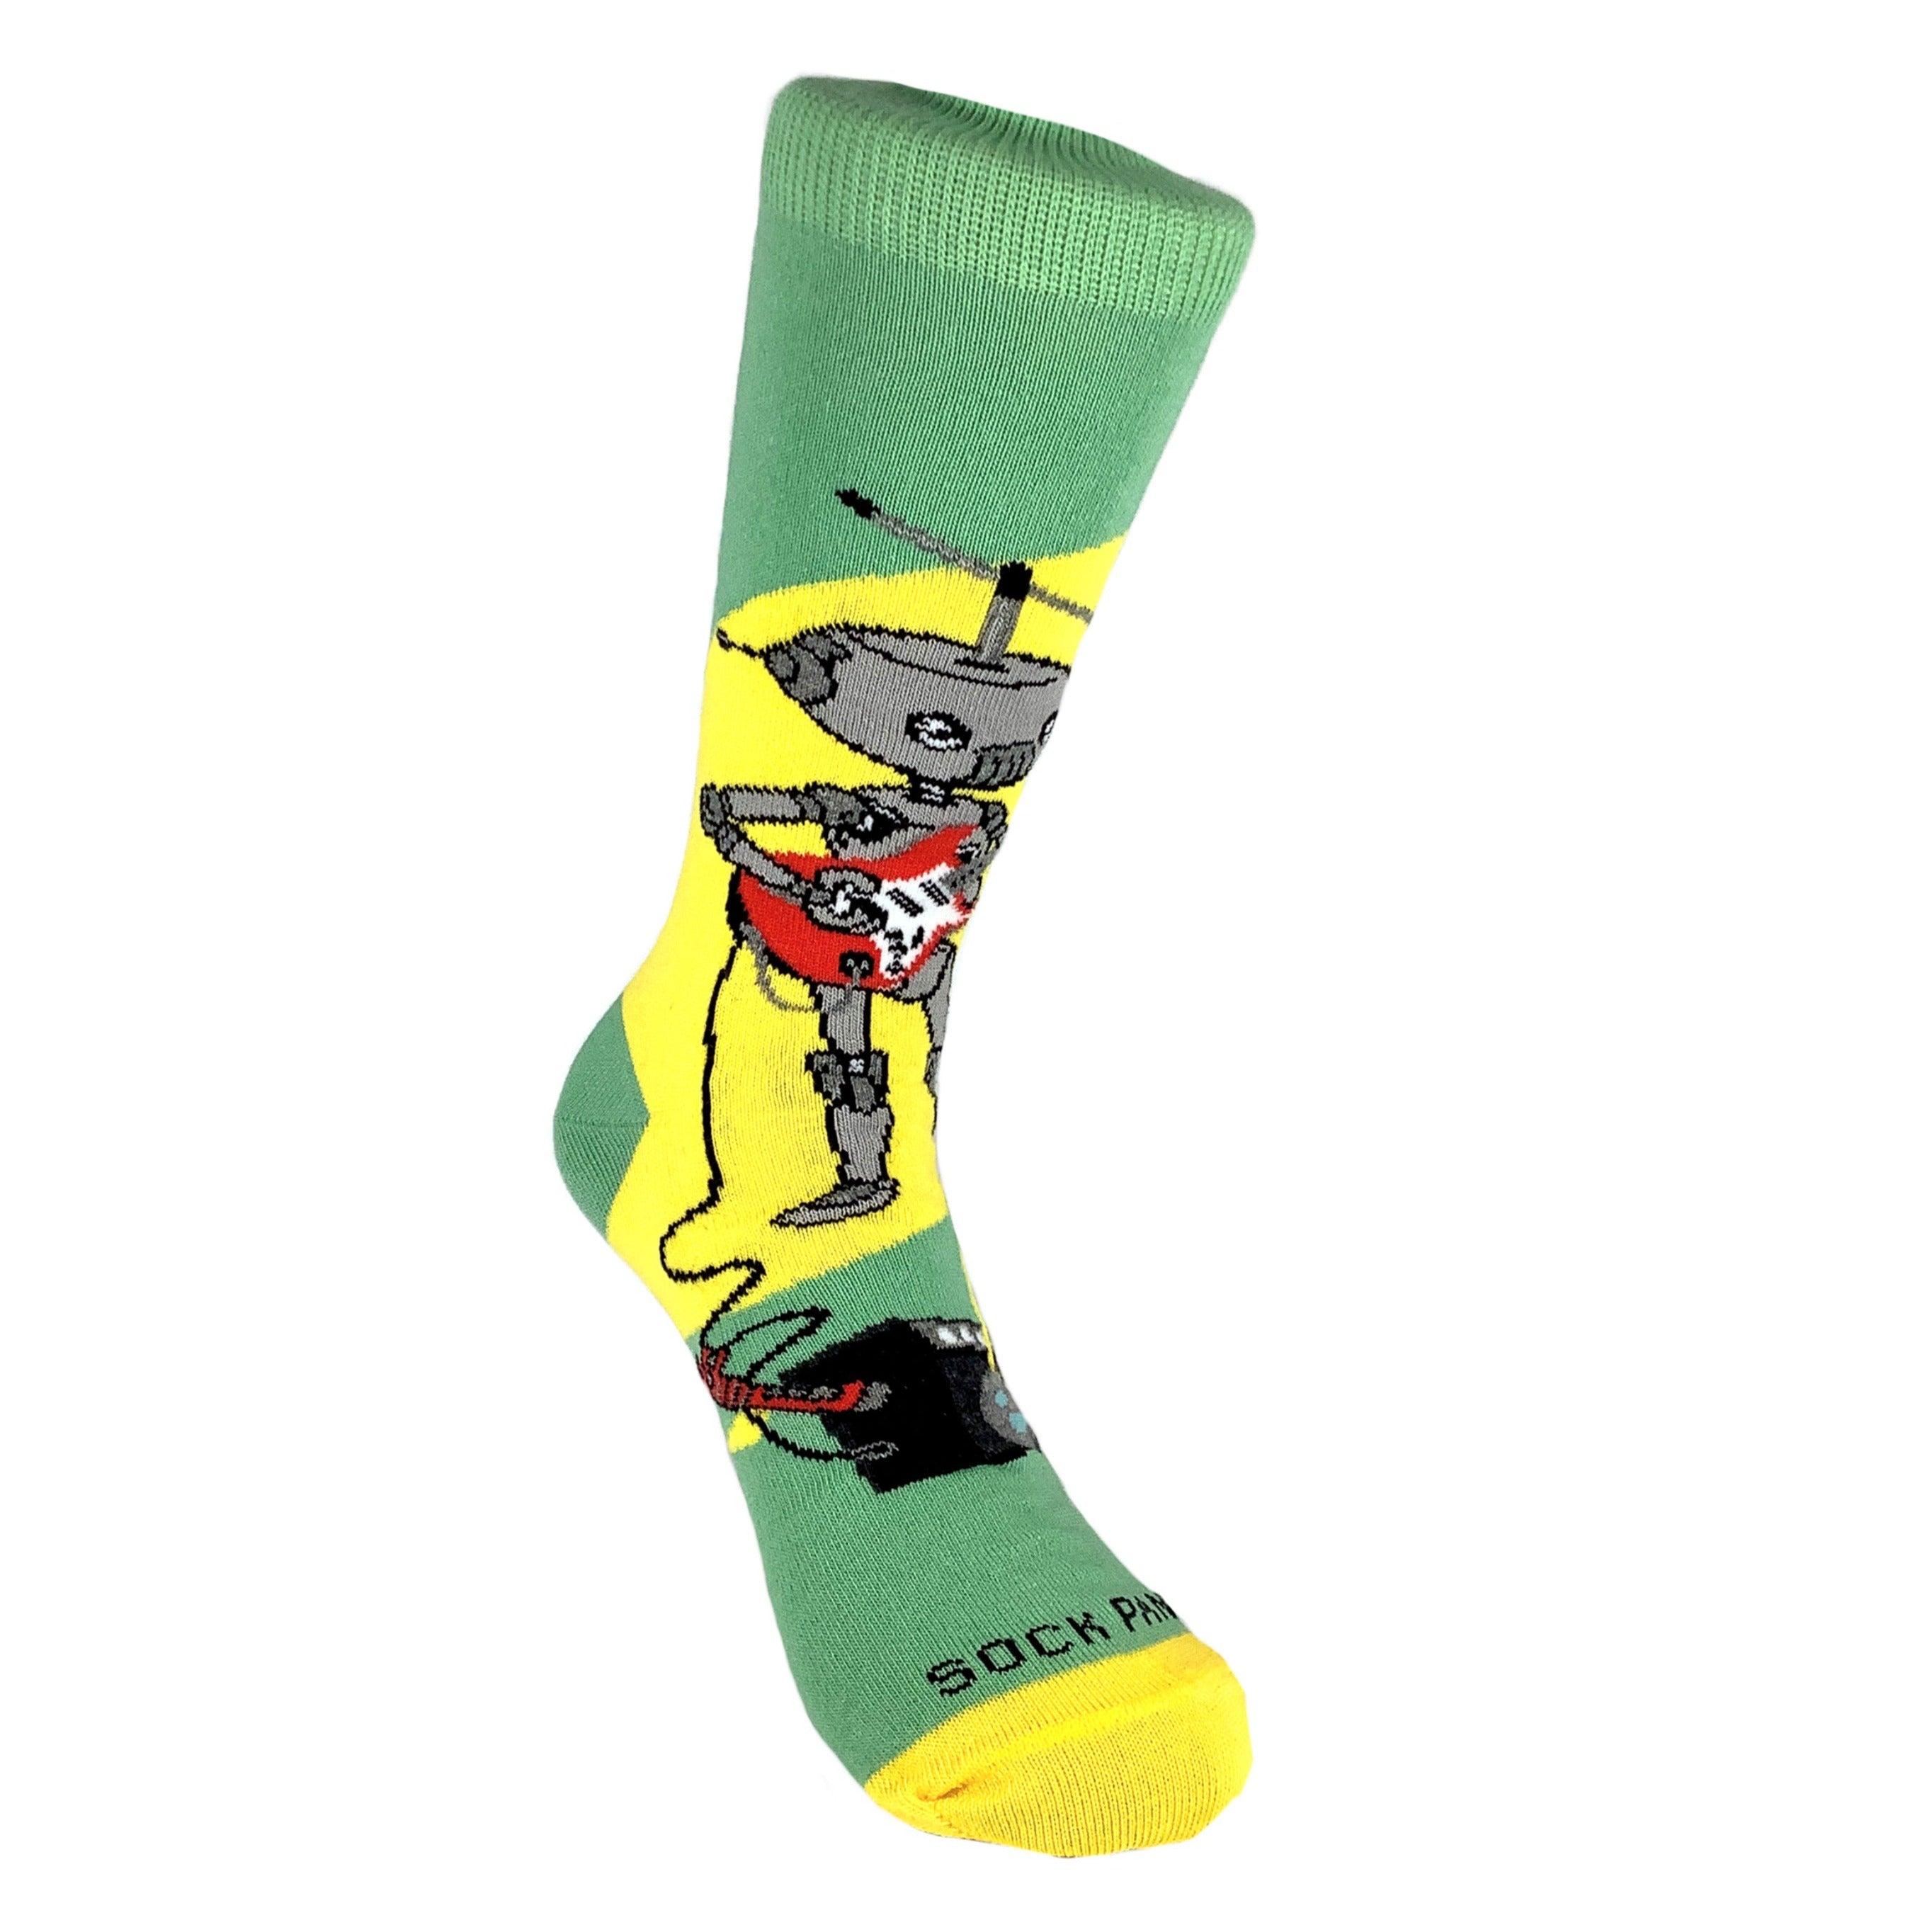 Guitar Playing Musical Robot Socks from the Sock Panda (Adult Small)